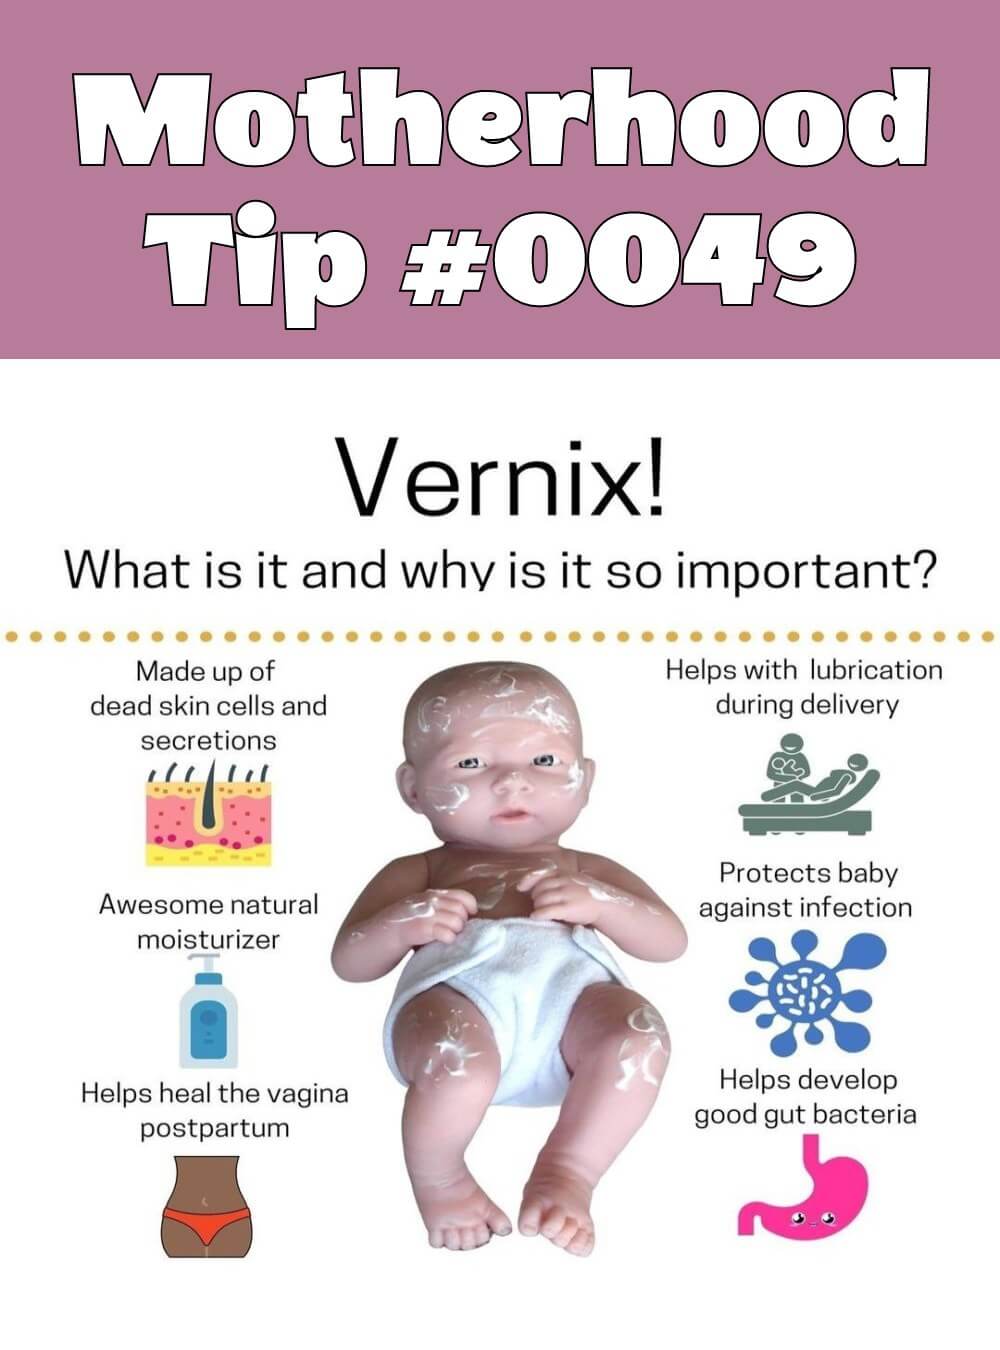 Parenting and Pregnancy Infographic | Motherhood Tip #0049